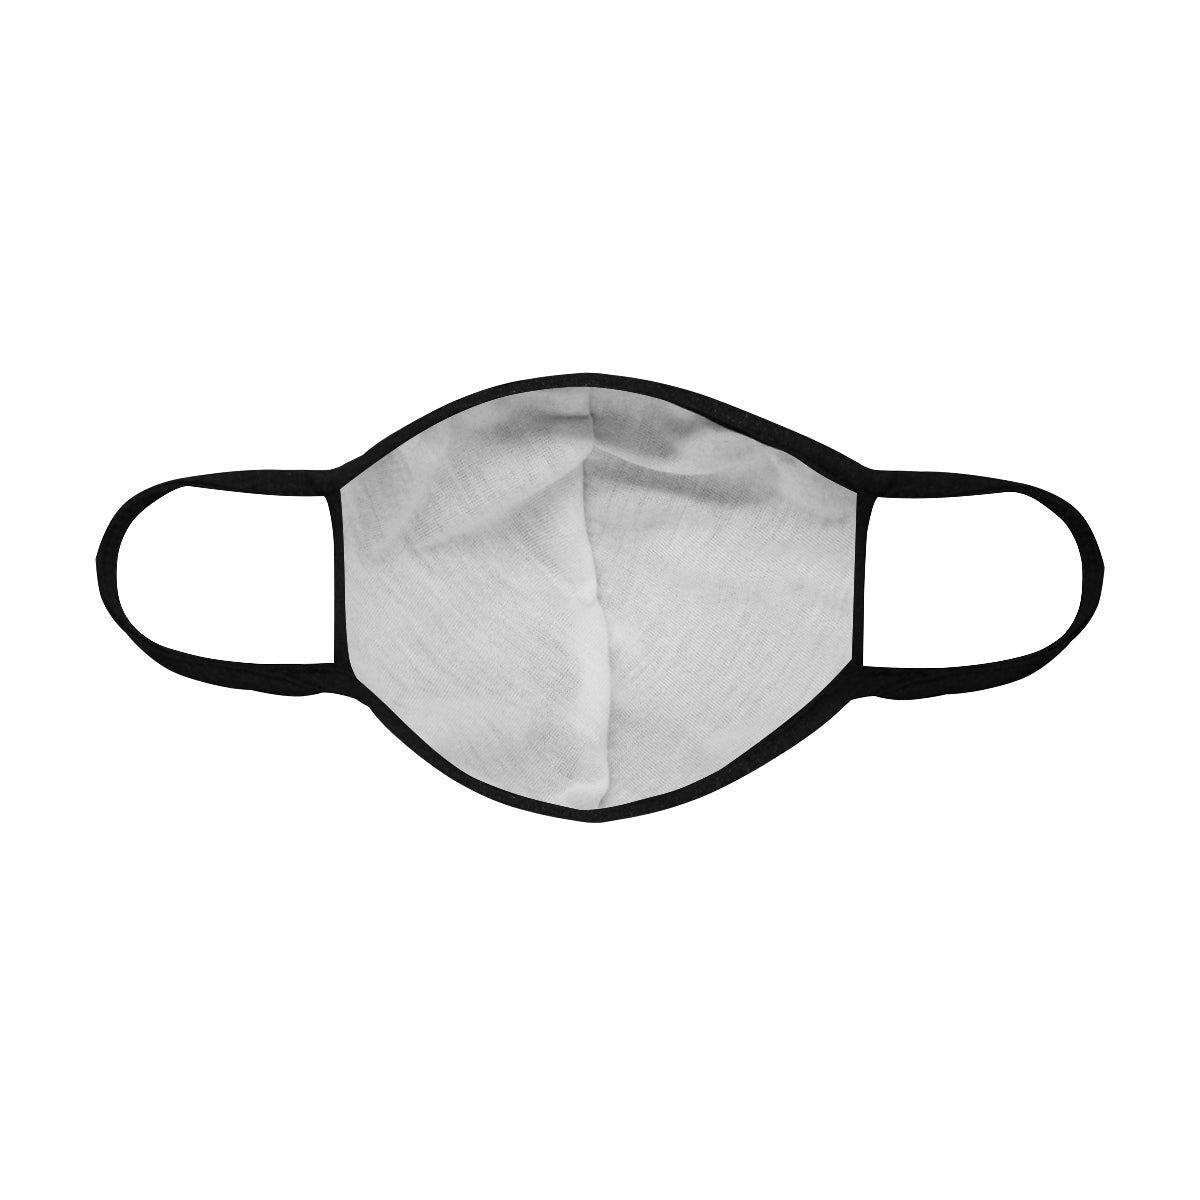 flyersetcinc Sun Galaxy Cotton Fabric Face Mask with filter slot (30 Filters Included) - Non-medical use